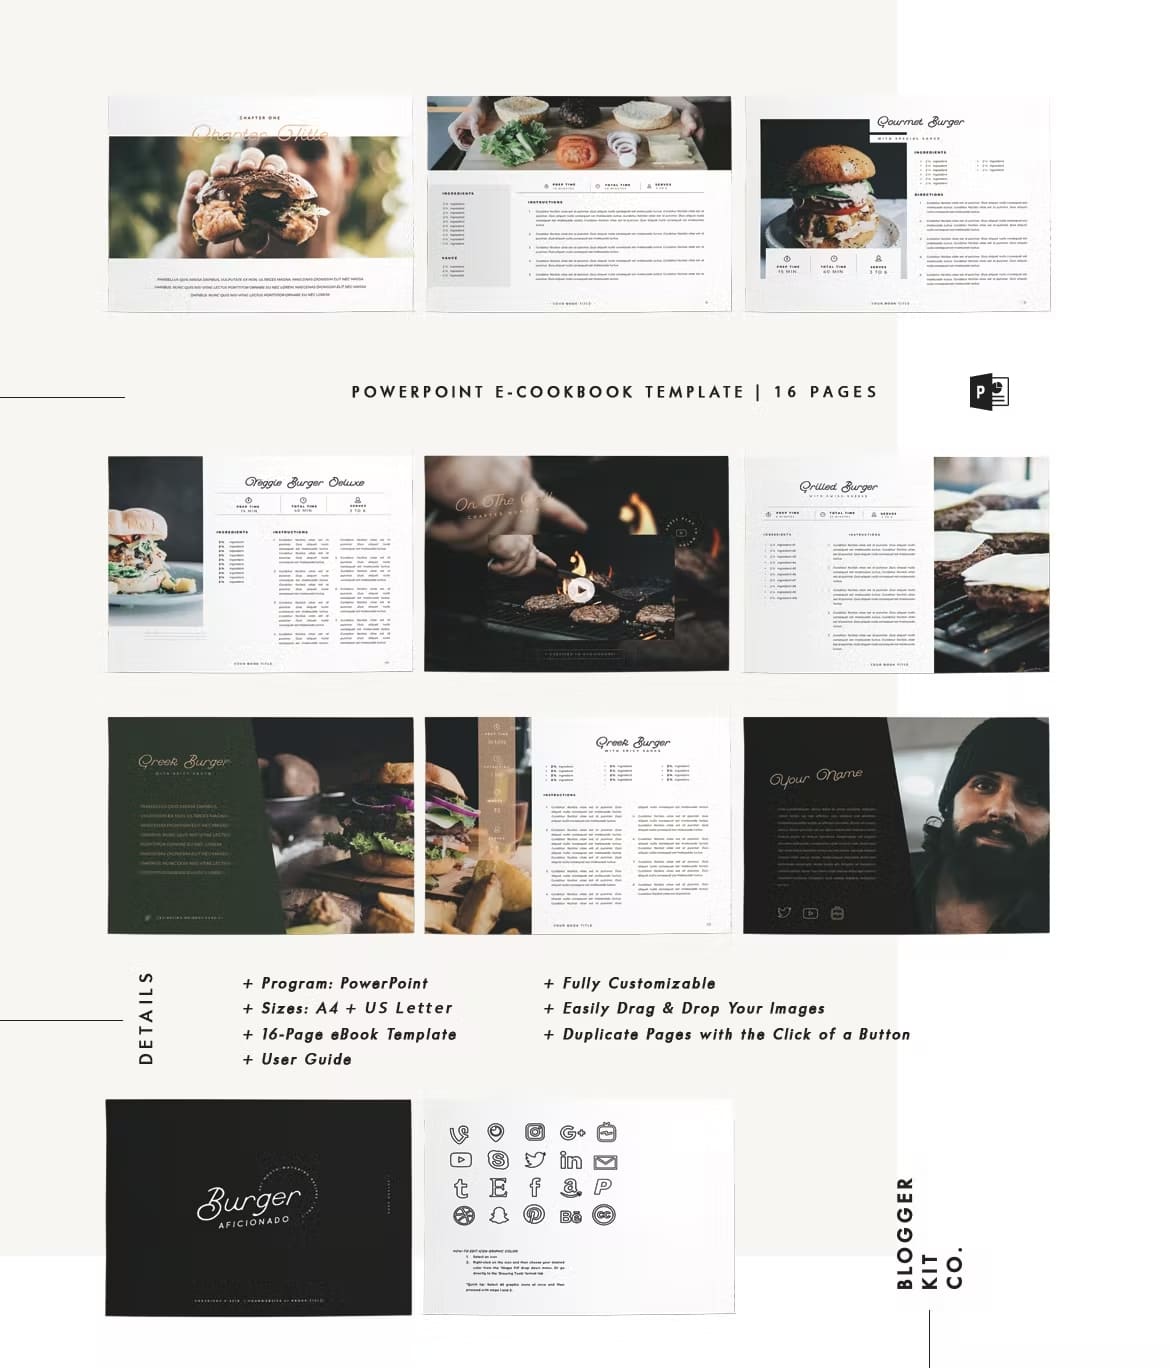 Eleven slide eBook template, 16 cookbook PowerPoint pages.